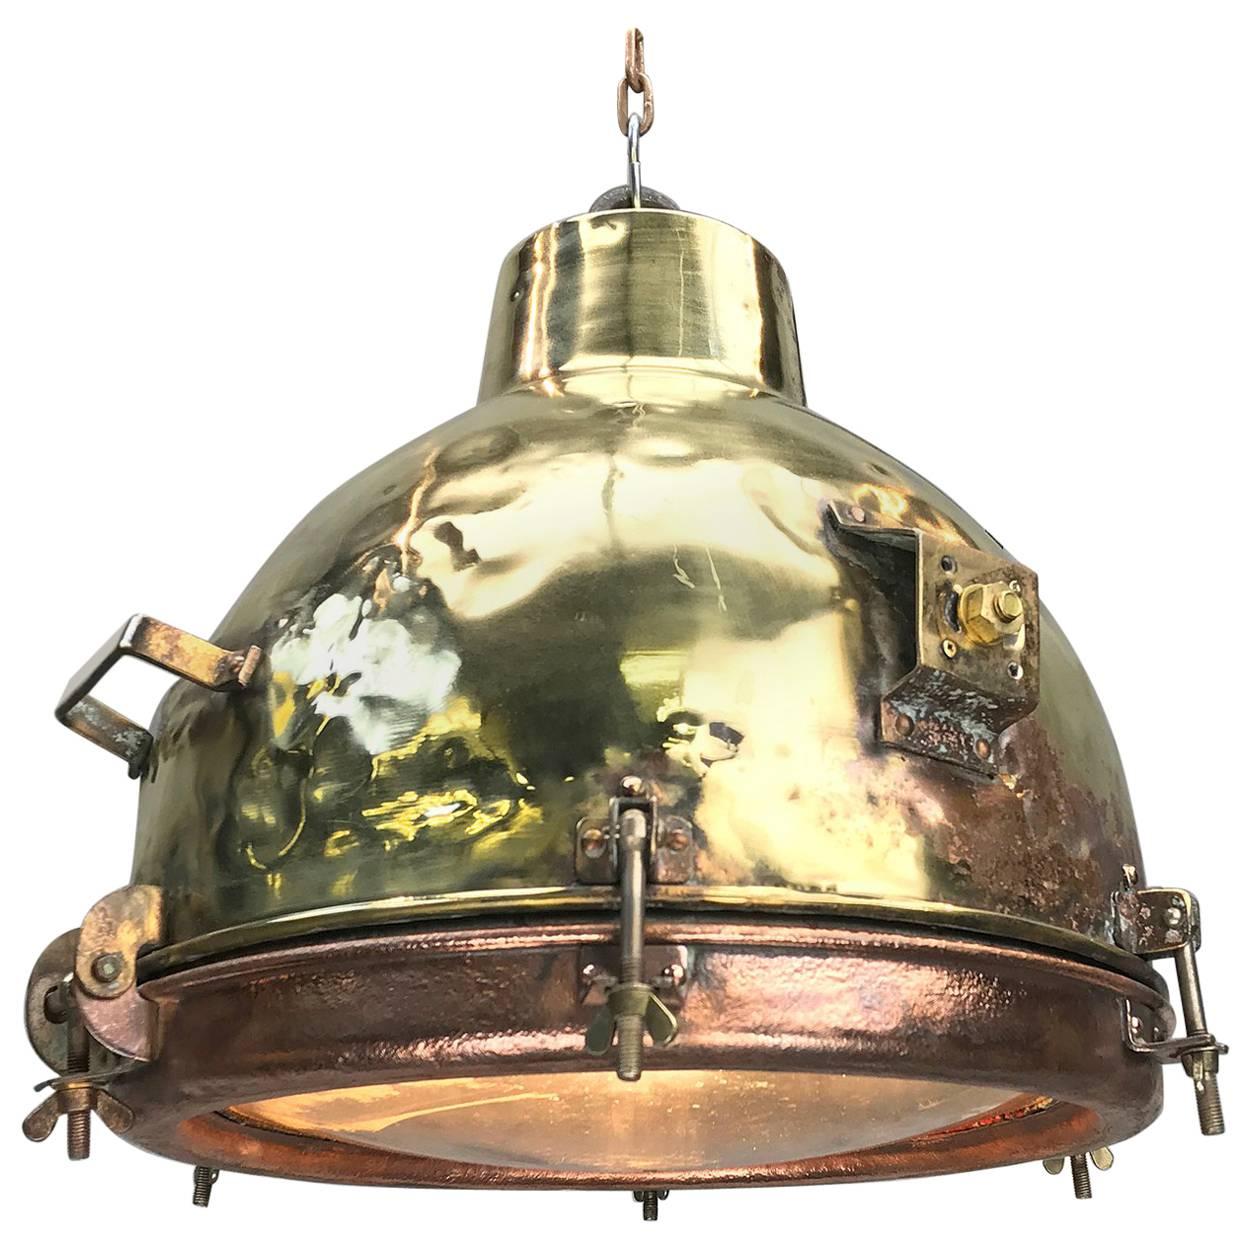 1960s Japanese Industrial Brass, Copper and Convex Glass Dome Pendant Light